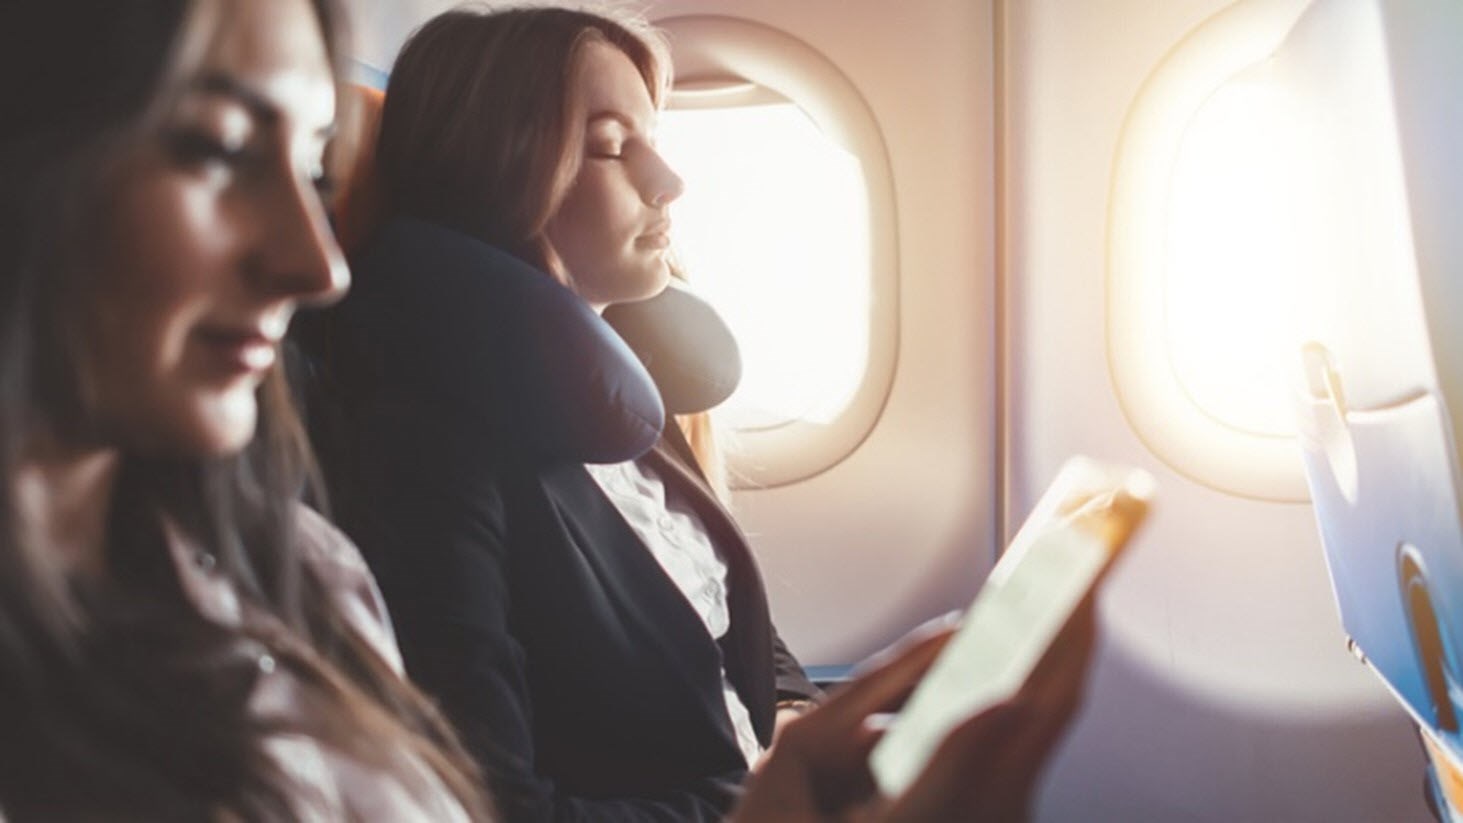 Young woman on plane using meditation techniques to combat anxiety.